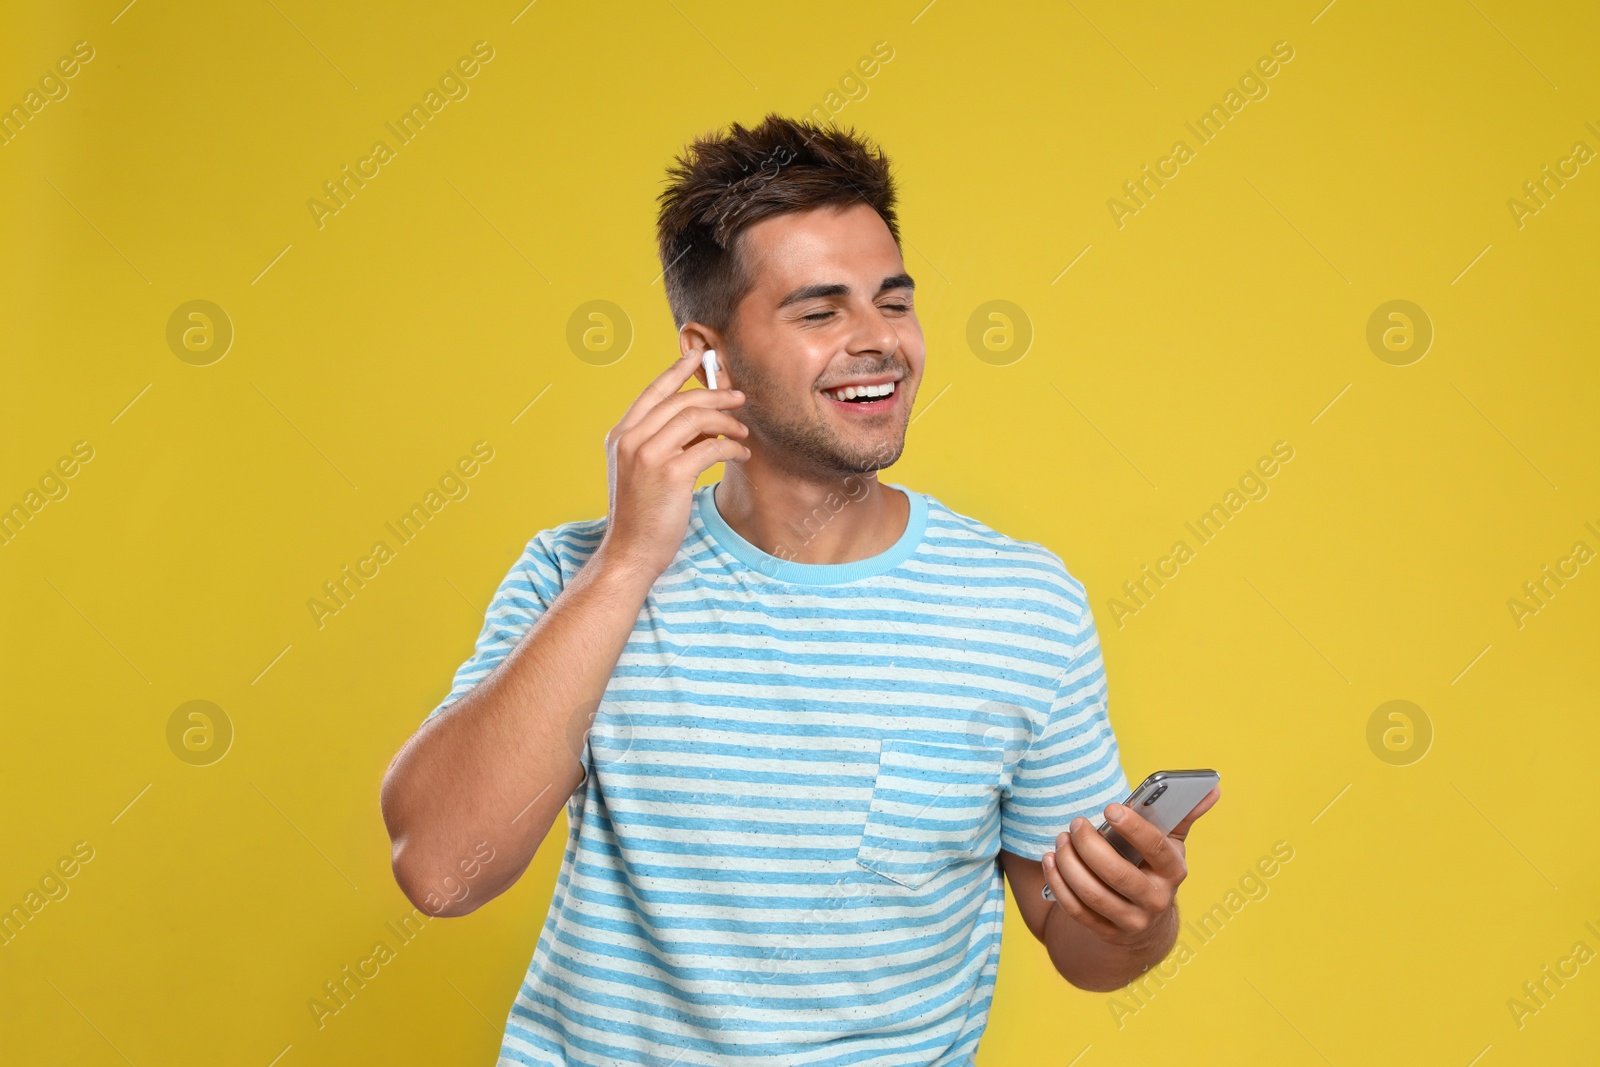 Photo of Happy young man with smartphone listening to music through wireless earphones on yellow background